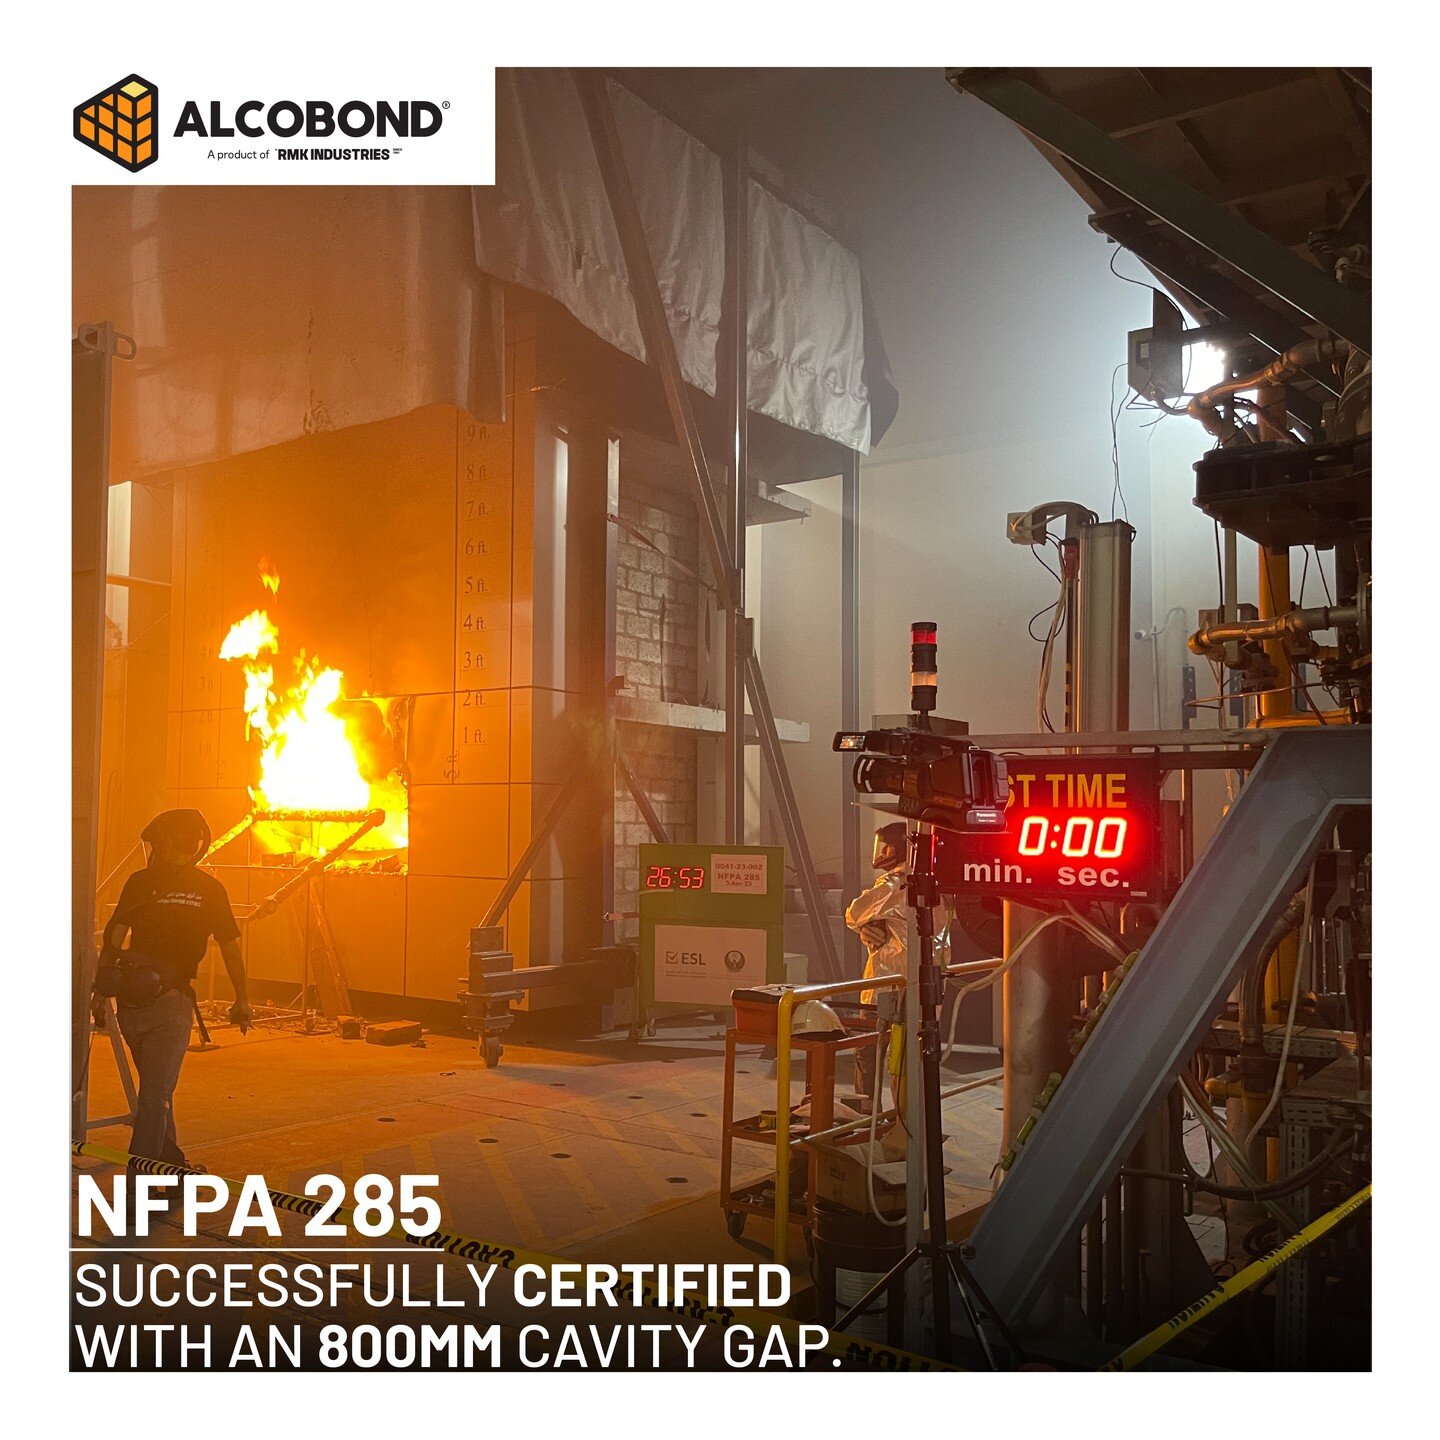 #TestingSeries

We are proud to announce that with #Alcobond's latest NFPA 285 (@nfpadotorg) certification, done in collaboration with Emirates Safety Laboratory (@emiratessafetylab), we are the first aluminum composite panel manufacturers in the #ME